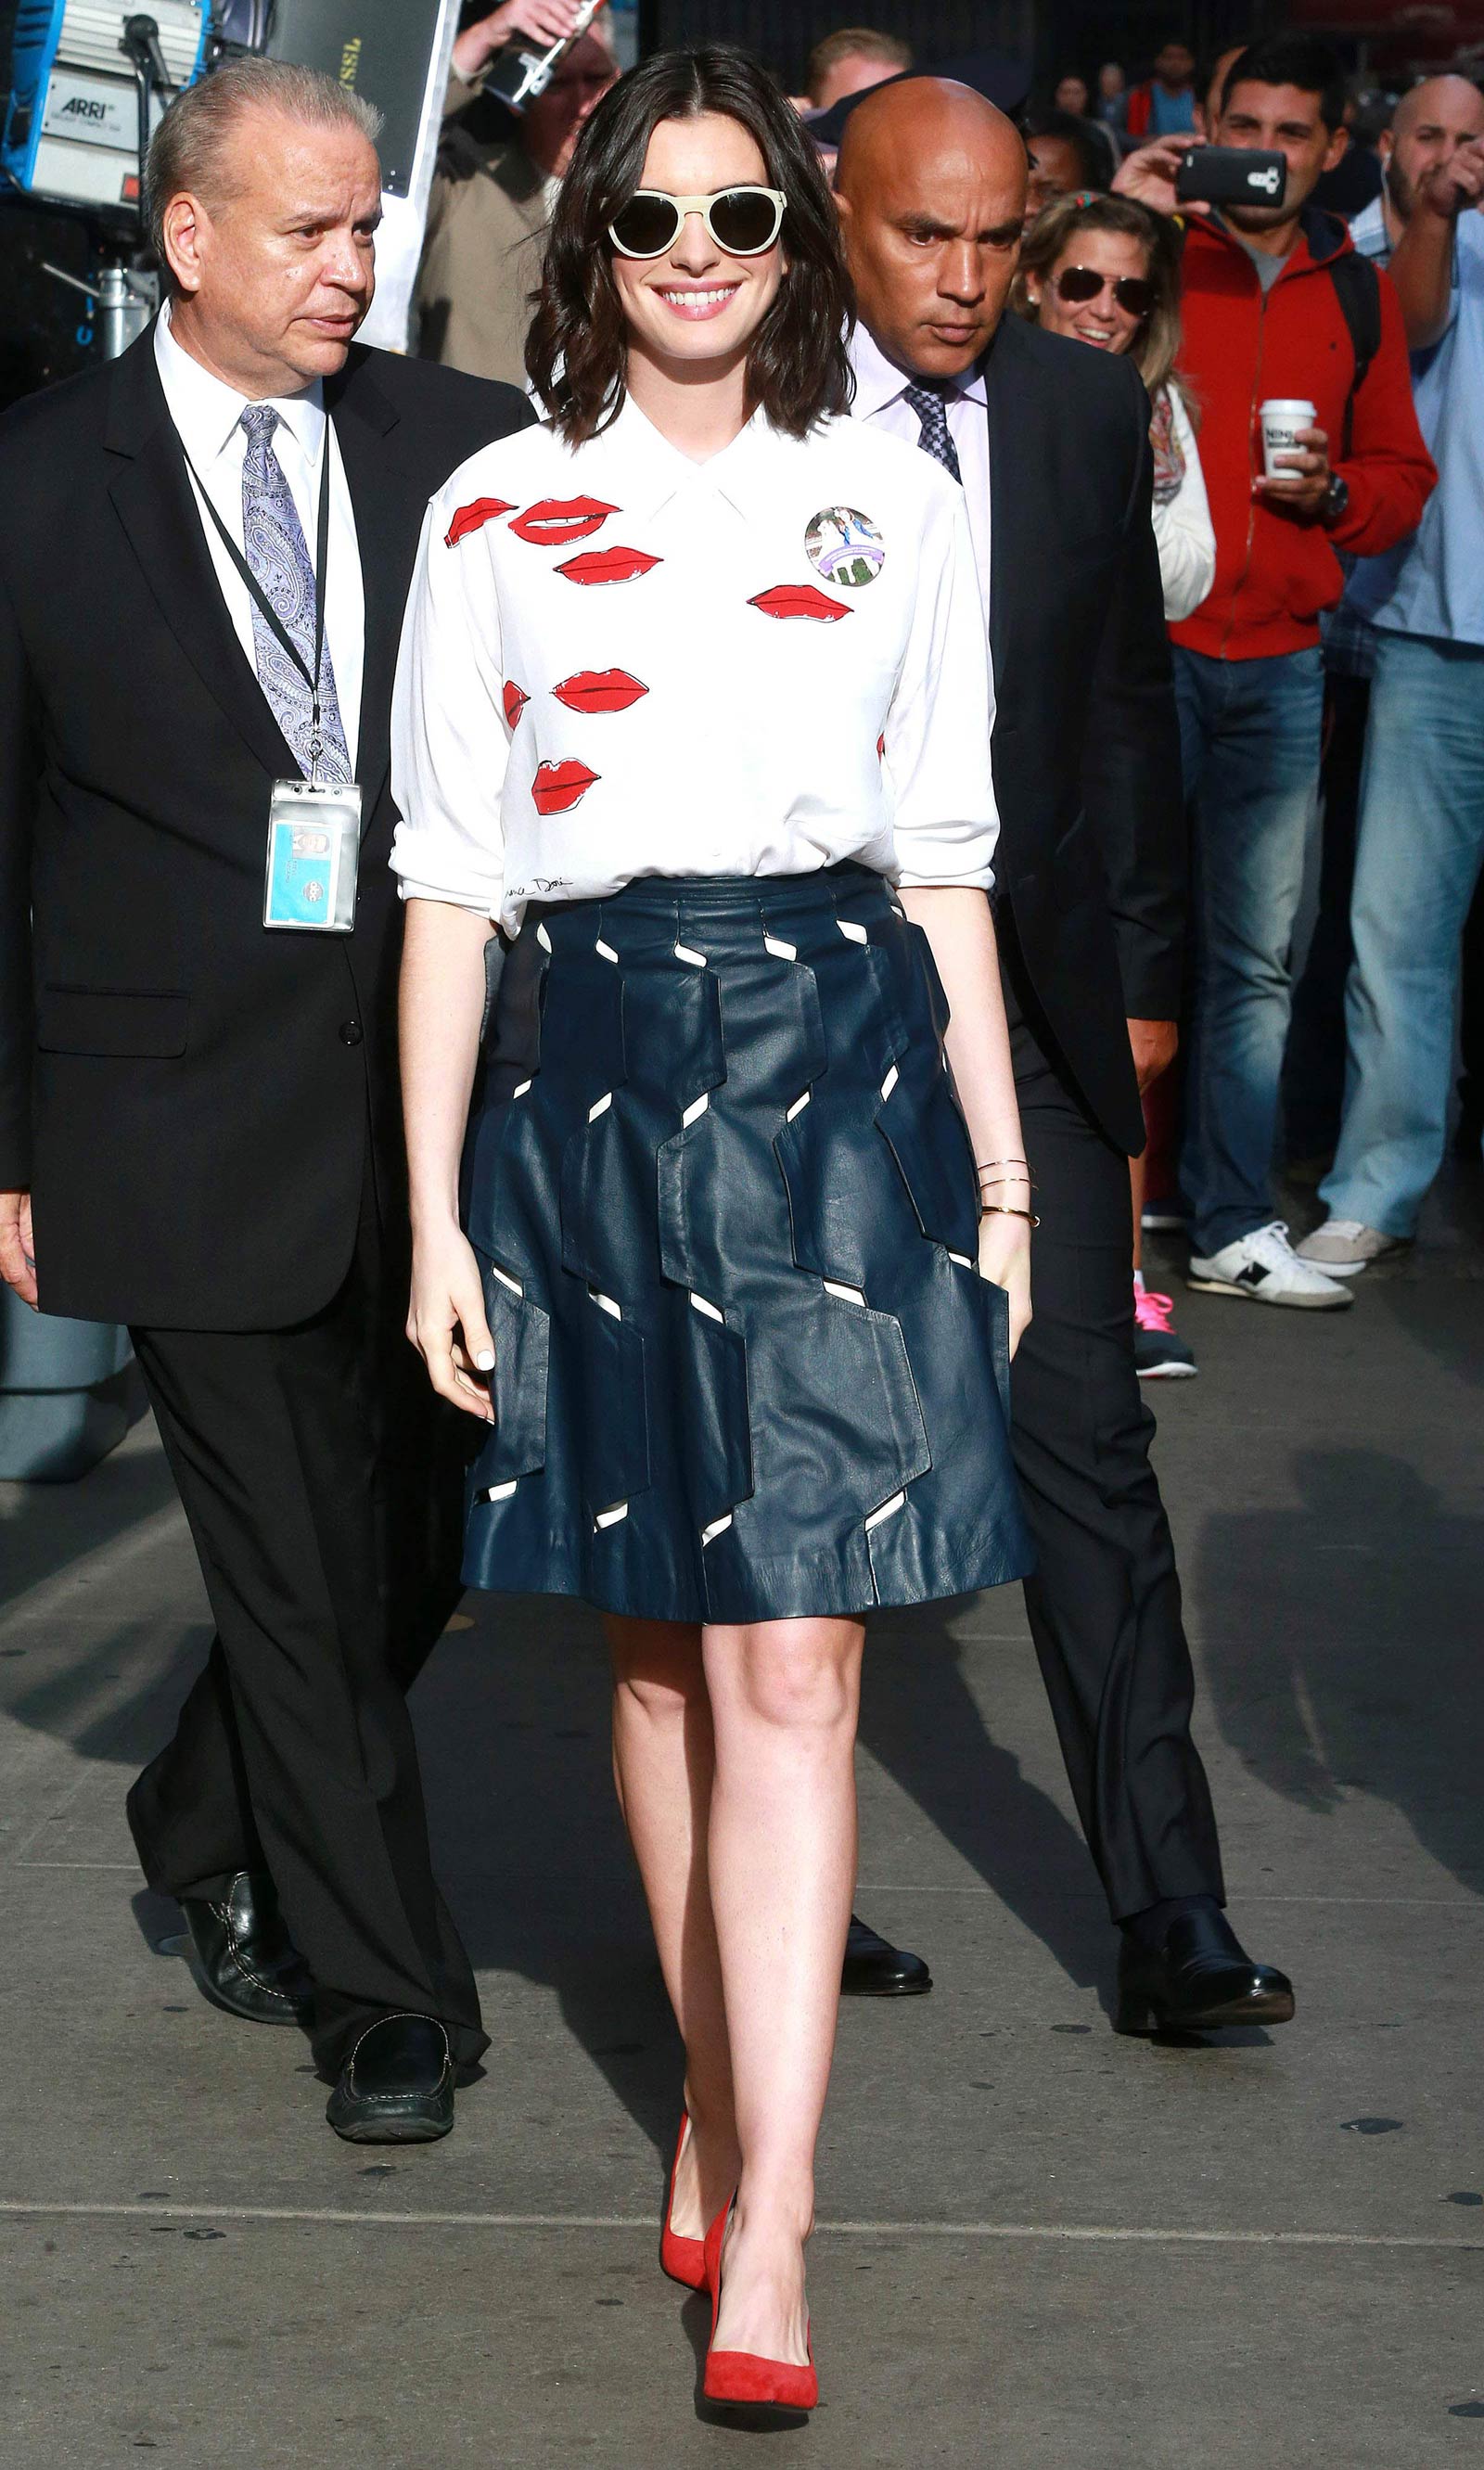 Anne Hathaway at ABC Studios in New York City